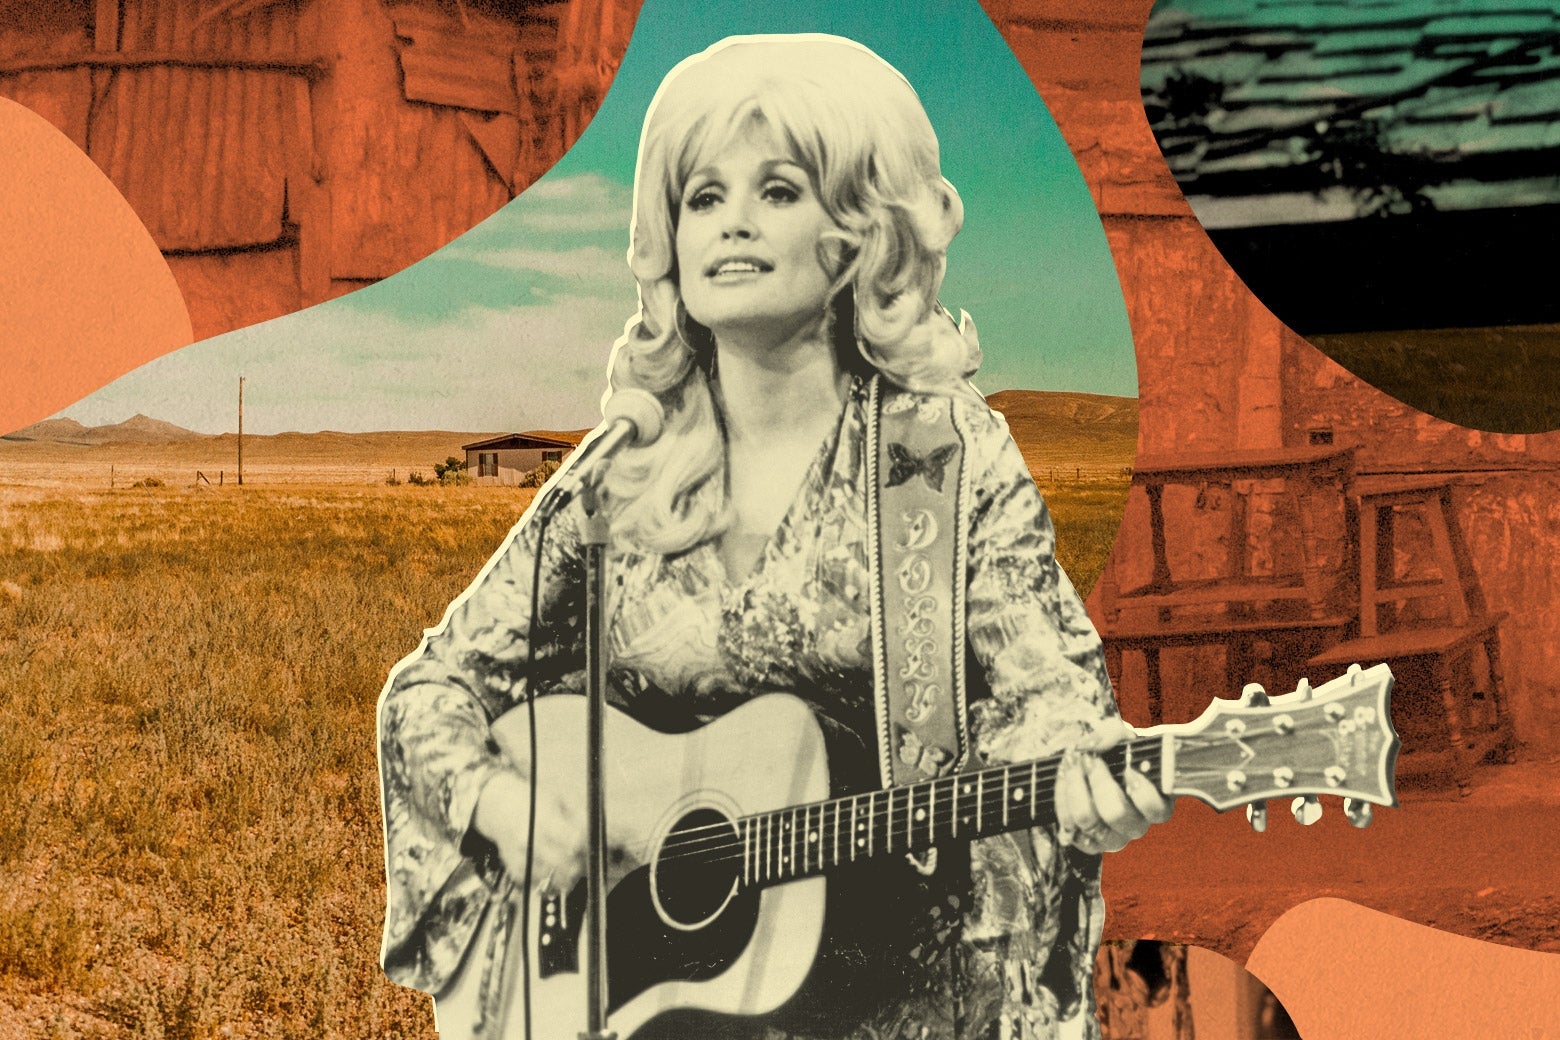 Dolly Parton with an acoustic guitar and incredible head of hair in 1974, shown before a rural landscape with a shack in it, a field, and weathered wooden home structures